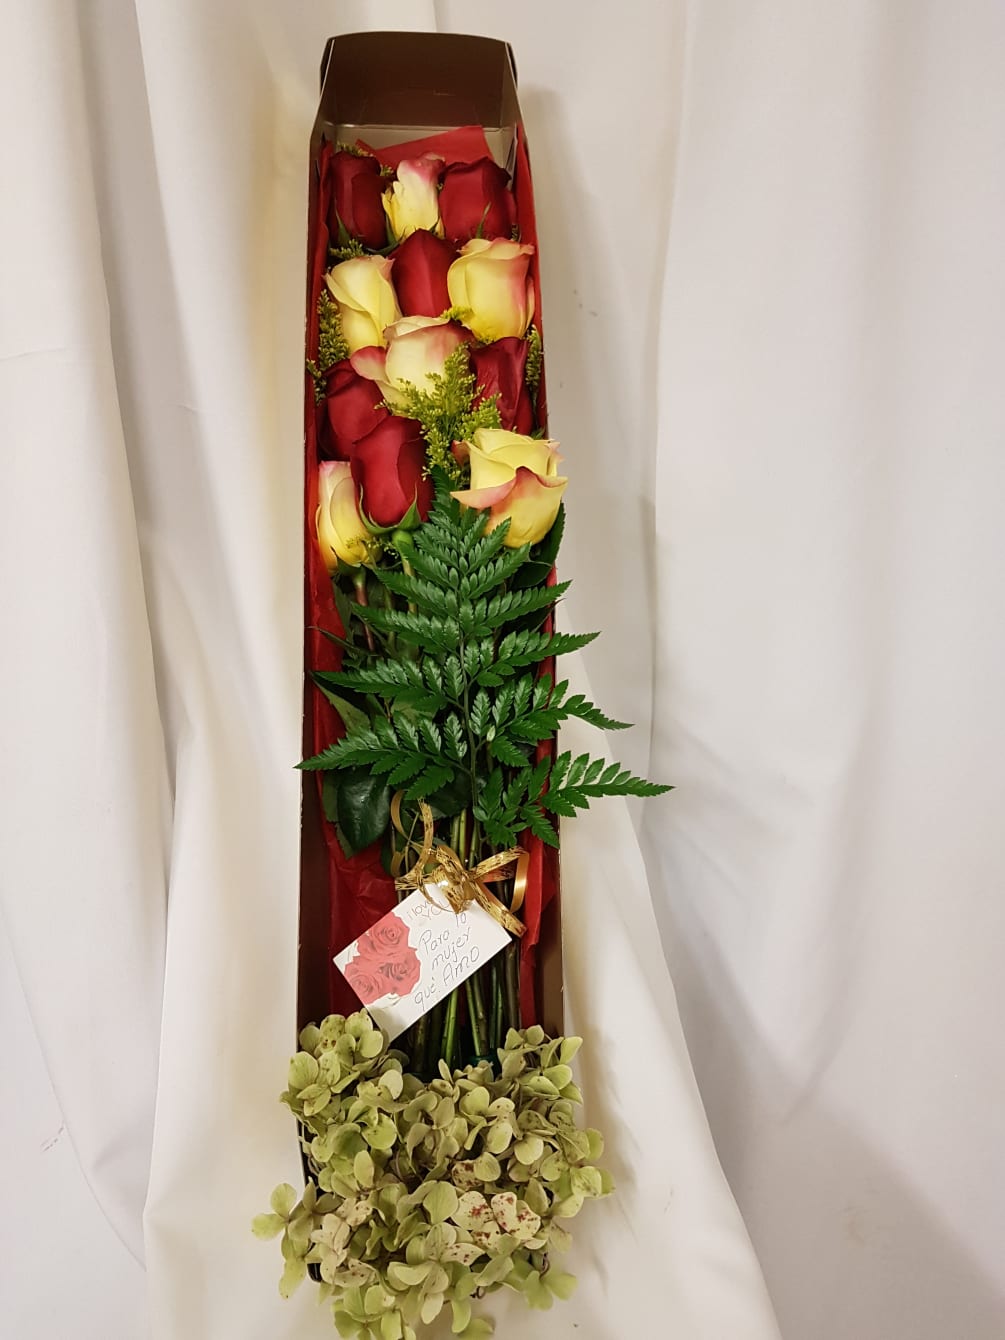 A simple yet elegant dozen roses placed in a box for a